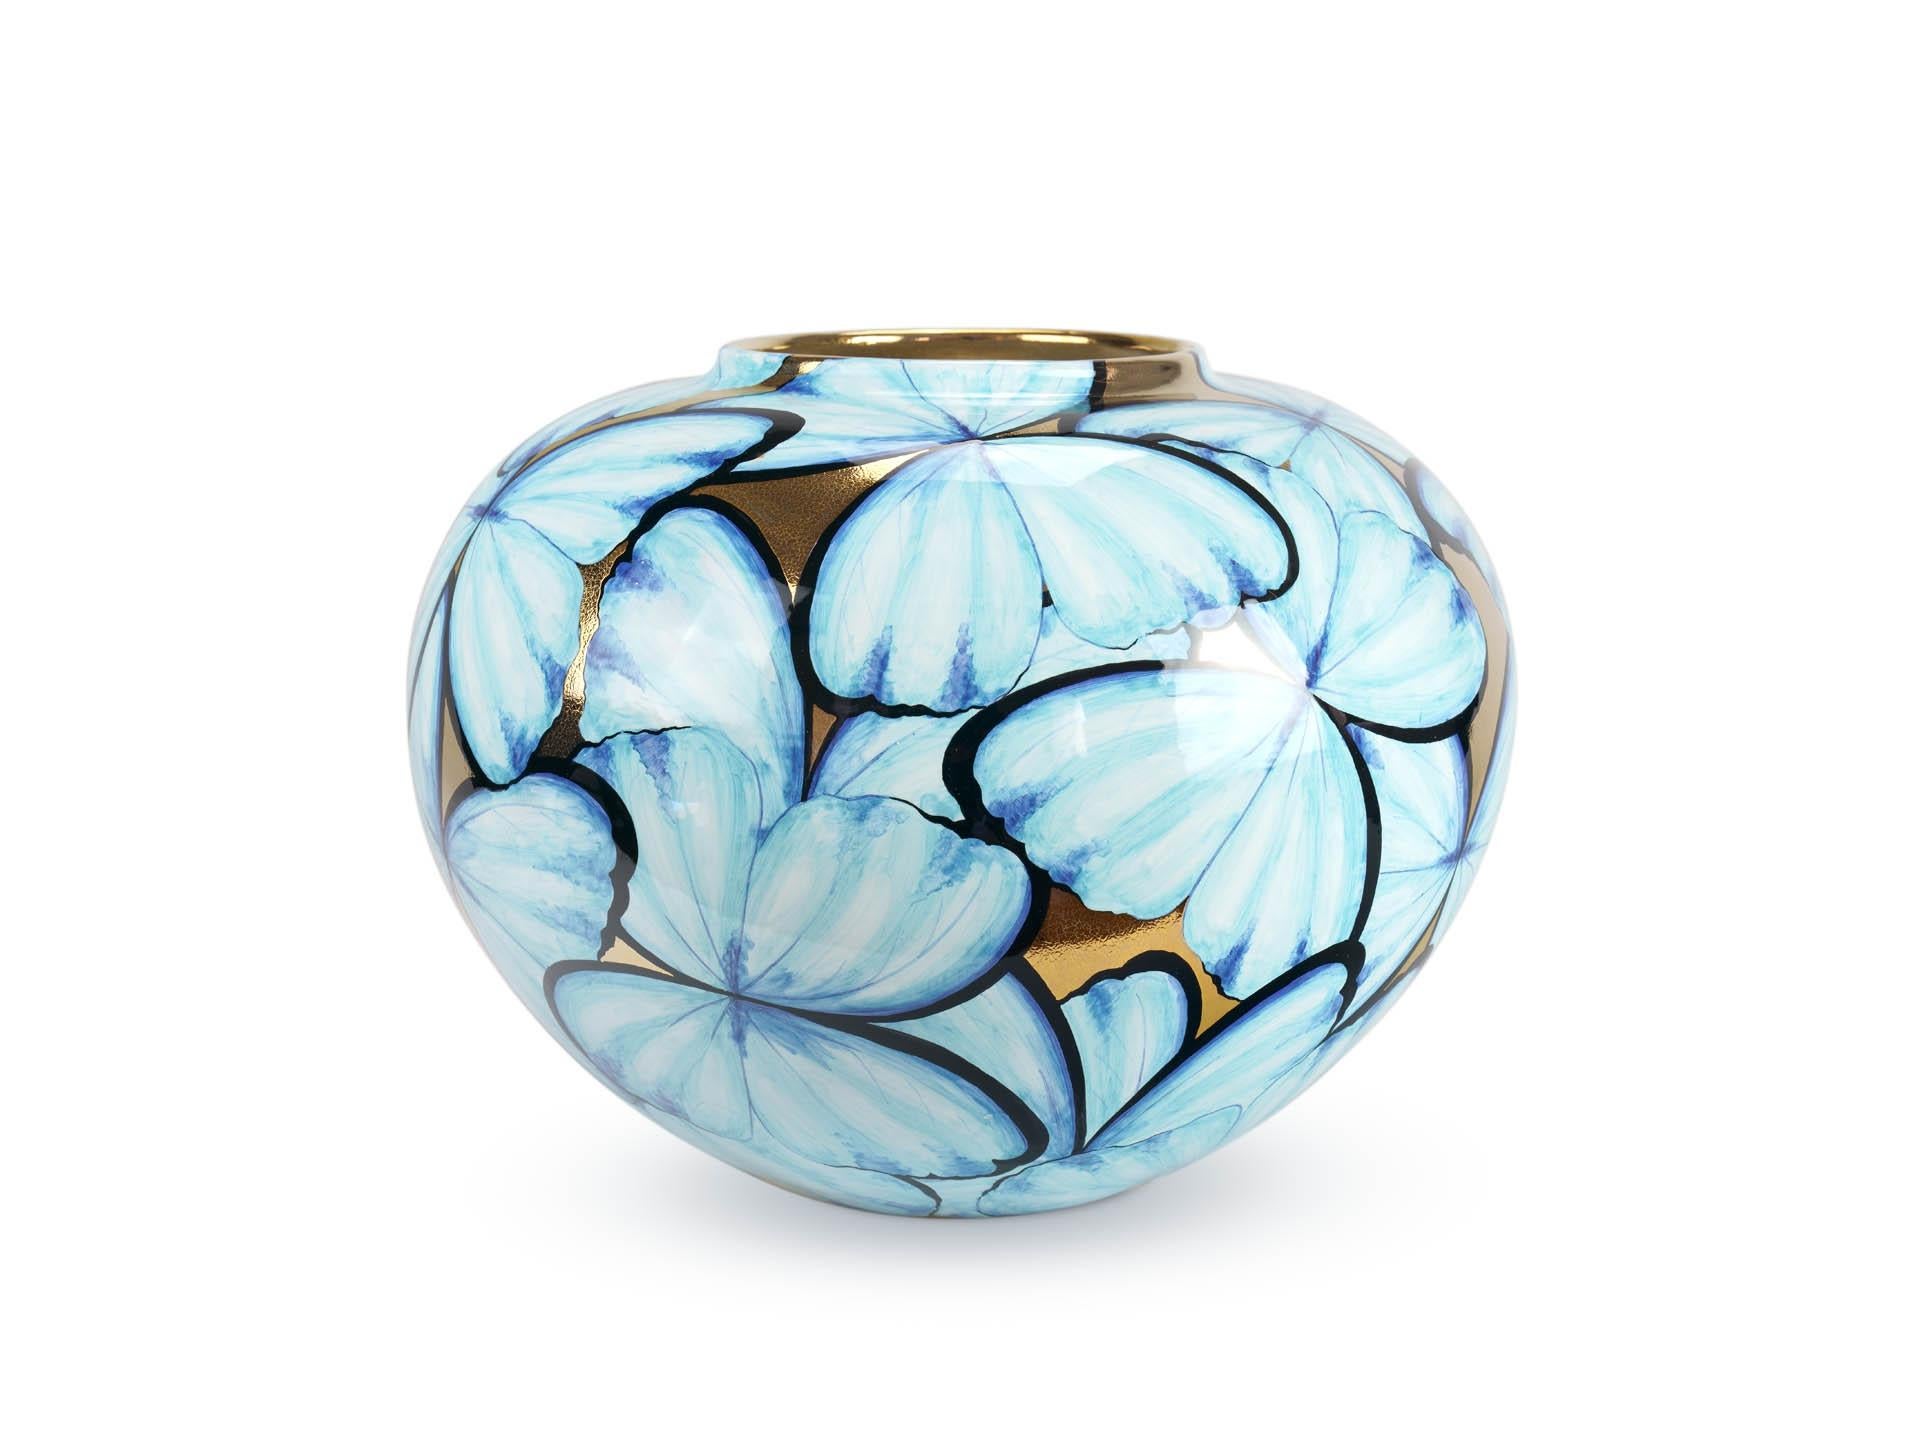 Modern Italian Hand-Painted Ceramic Vase Blue Butterflies on 24kt Gold Accented Surface For Sale